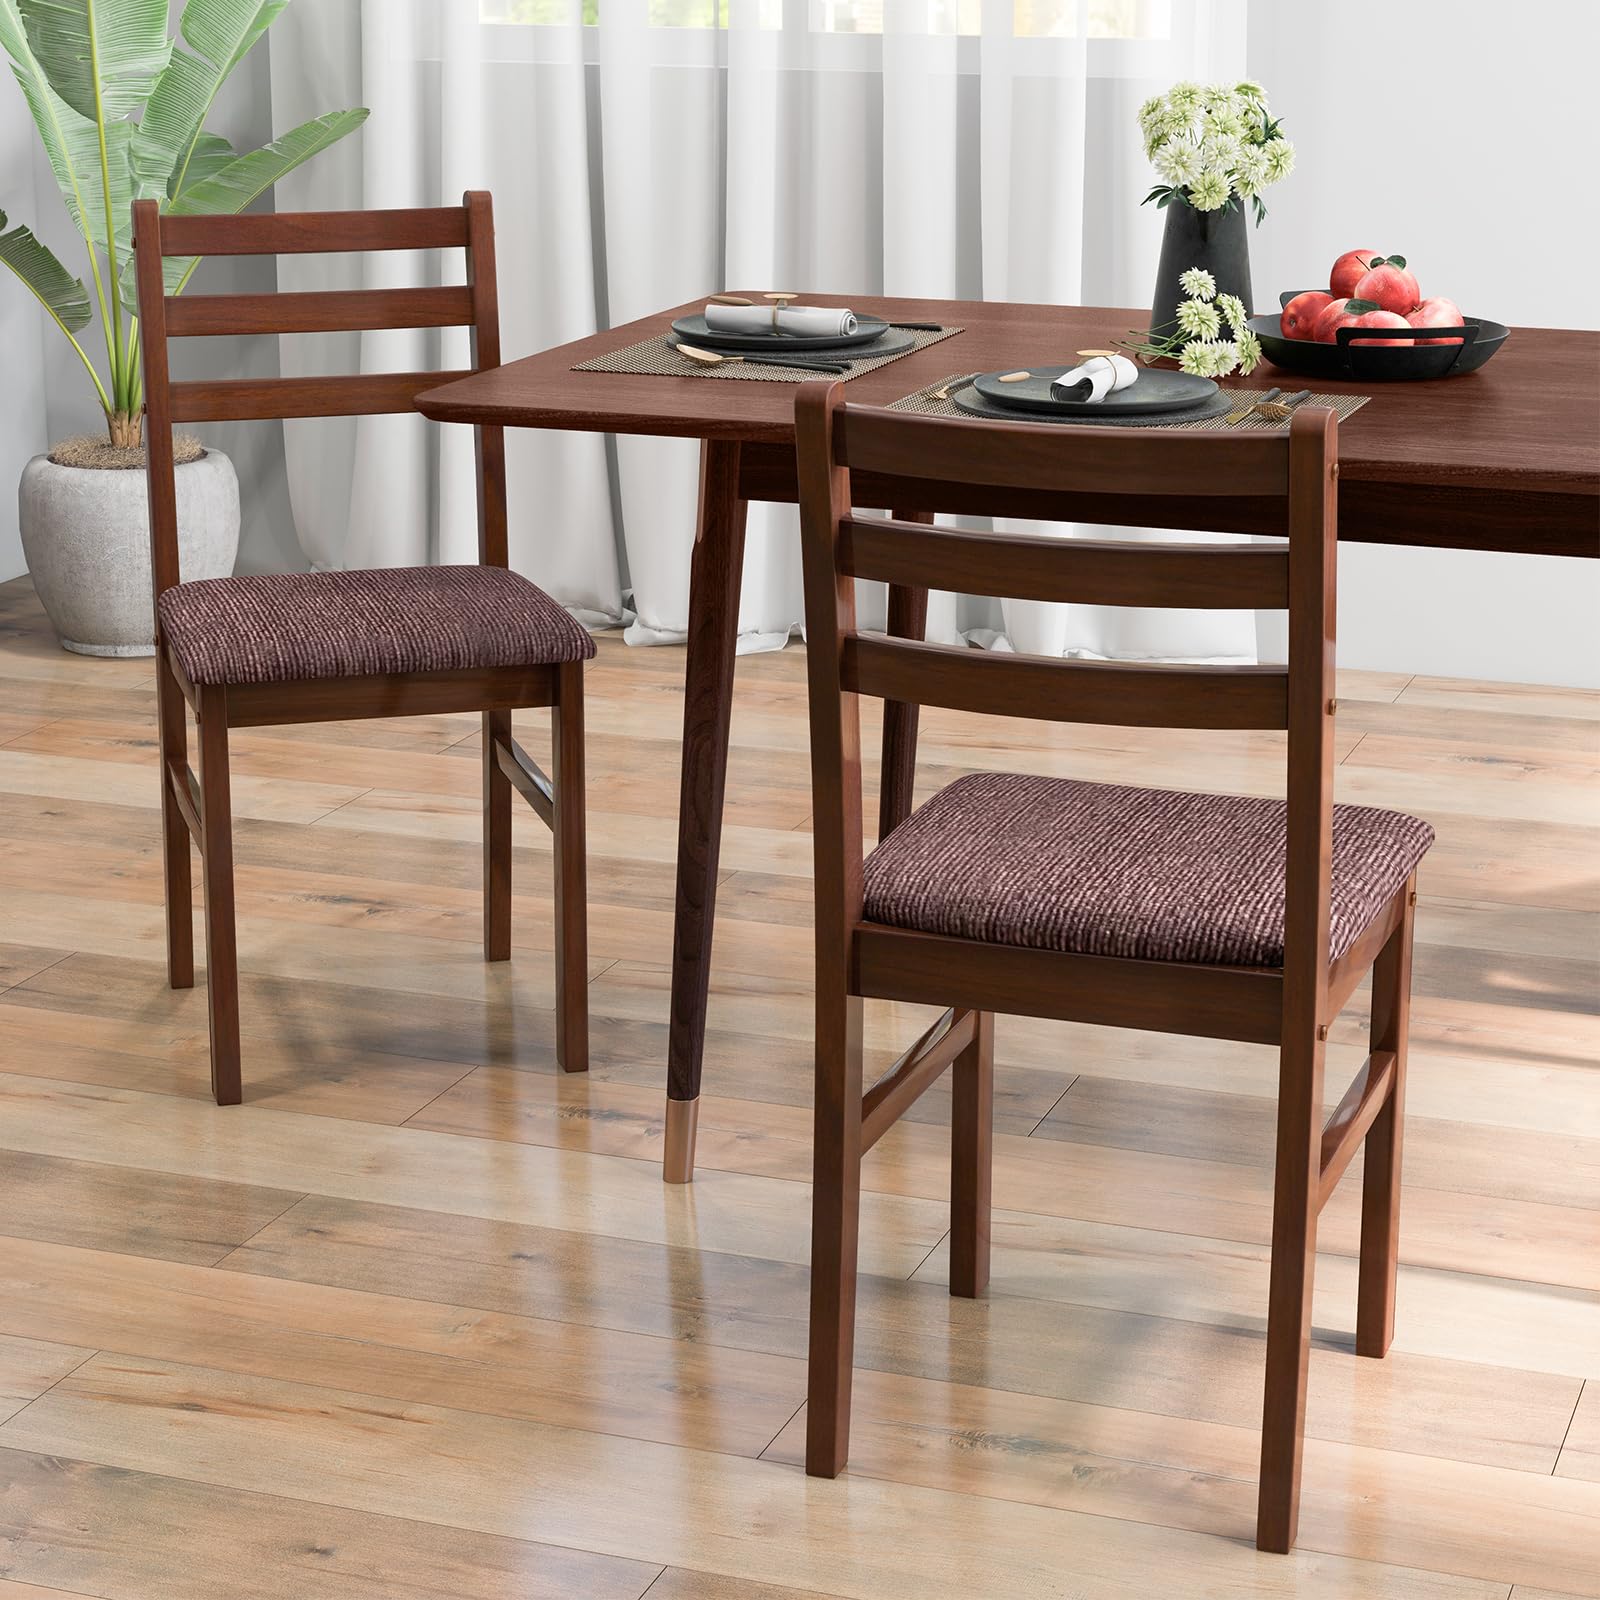 Giantex Wooden Dining Chairs Walnut Set of 4, Mid-Century Dining Chair with Padded Seat